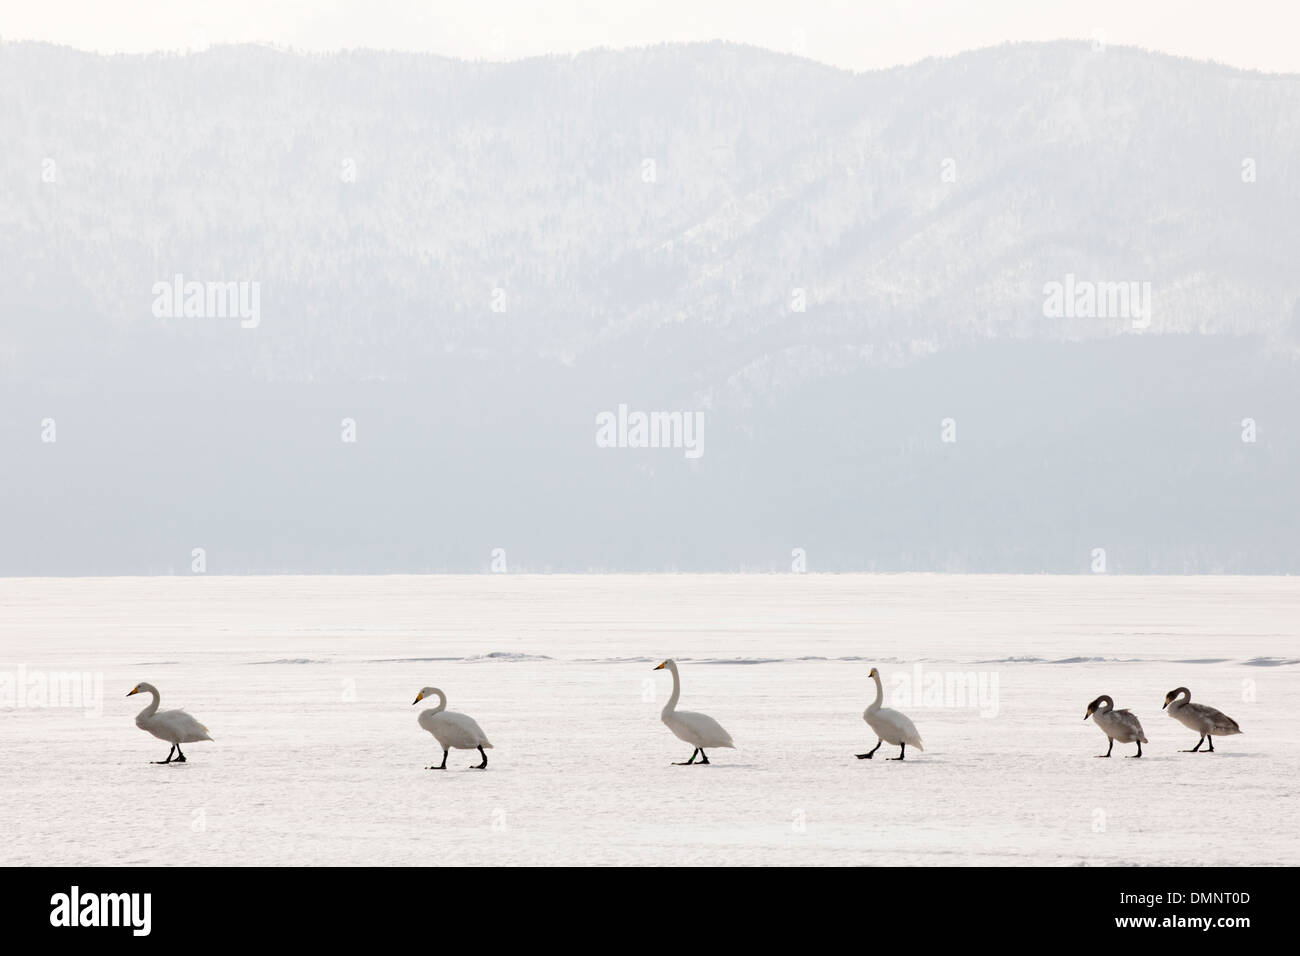 Whooper swans walking in line at frozen lake. Stock Photo